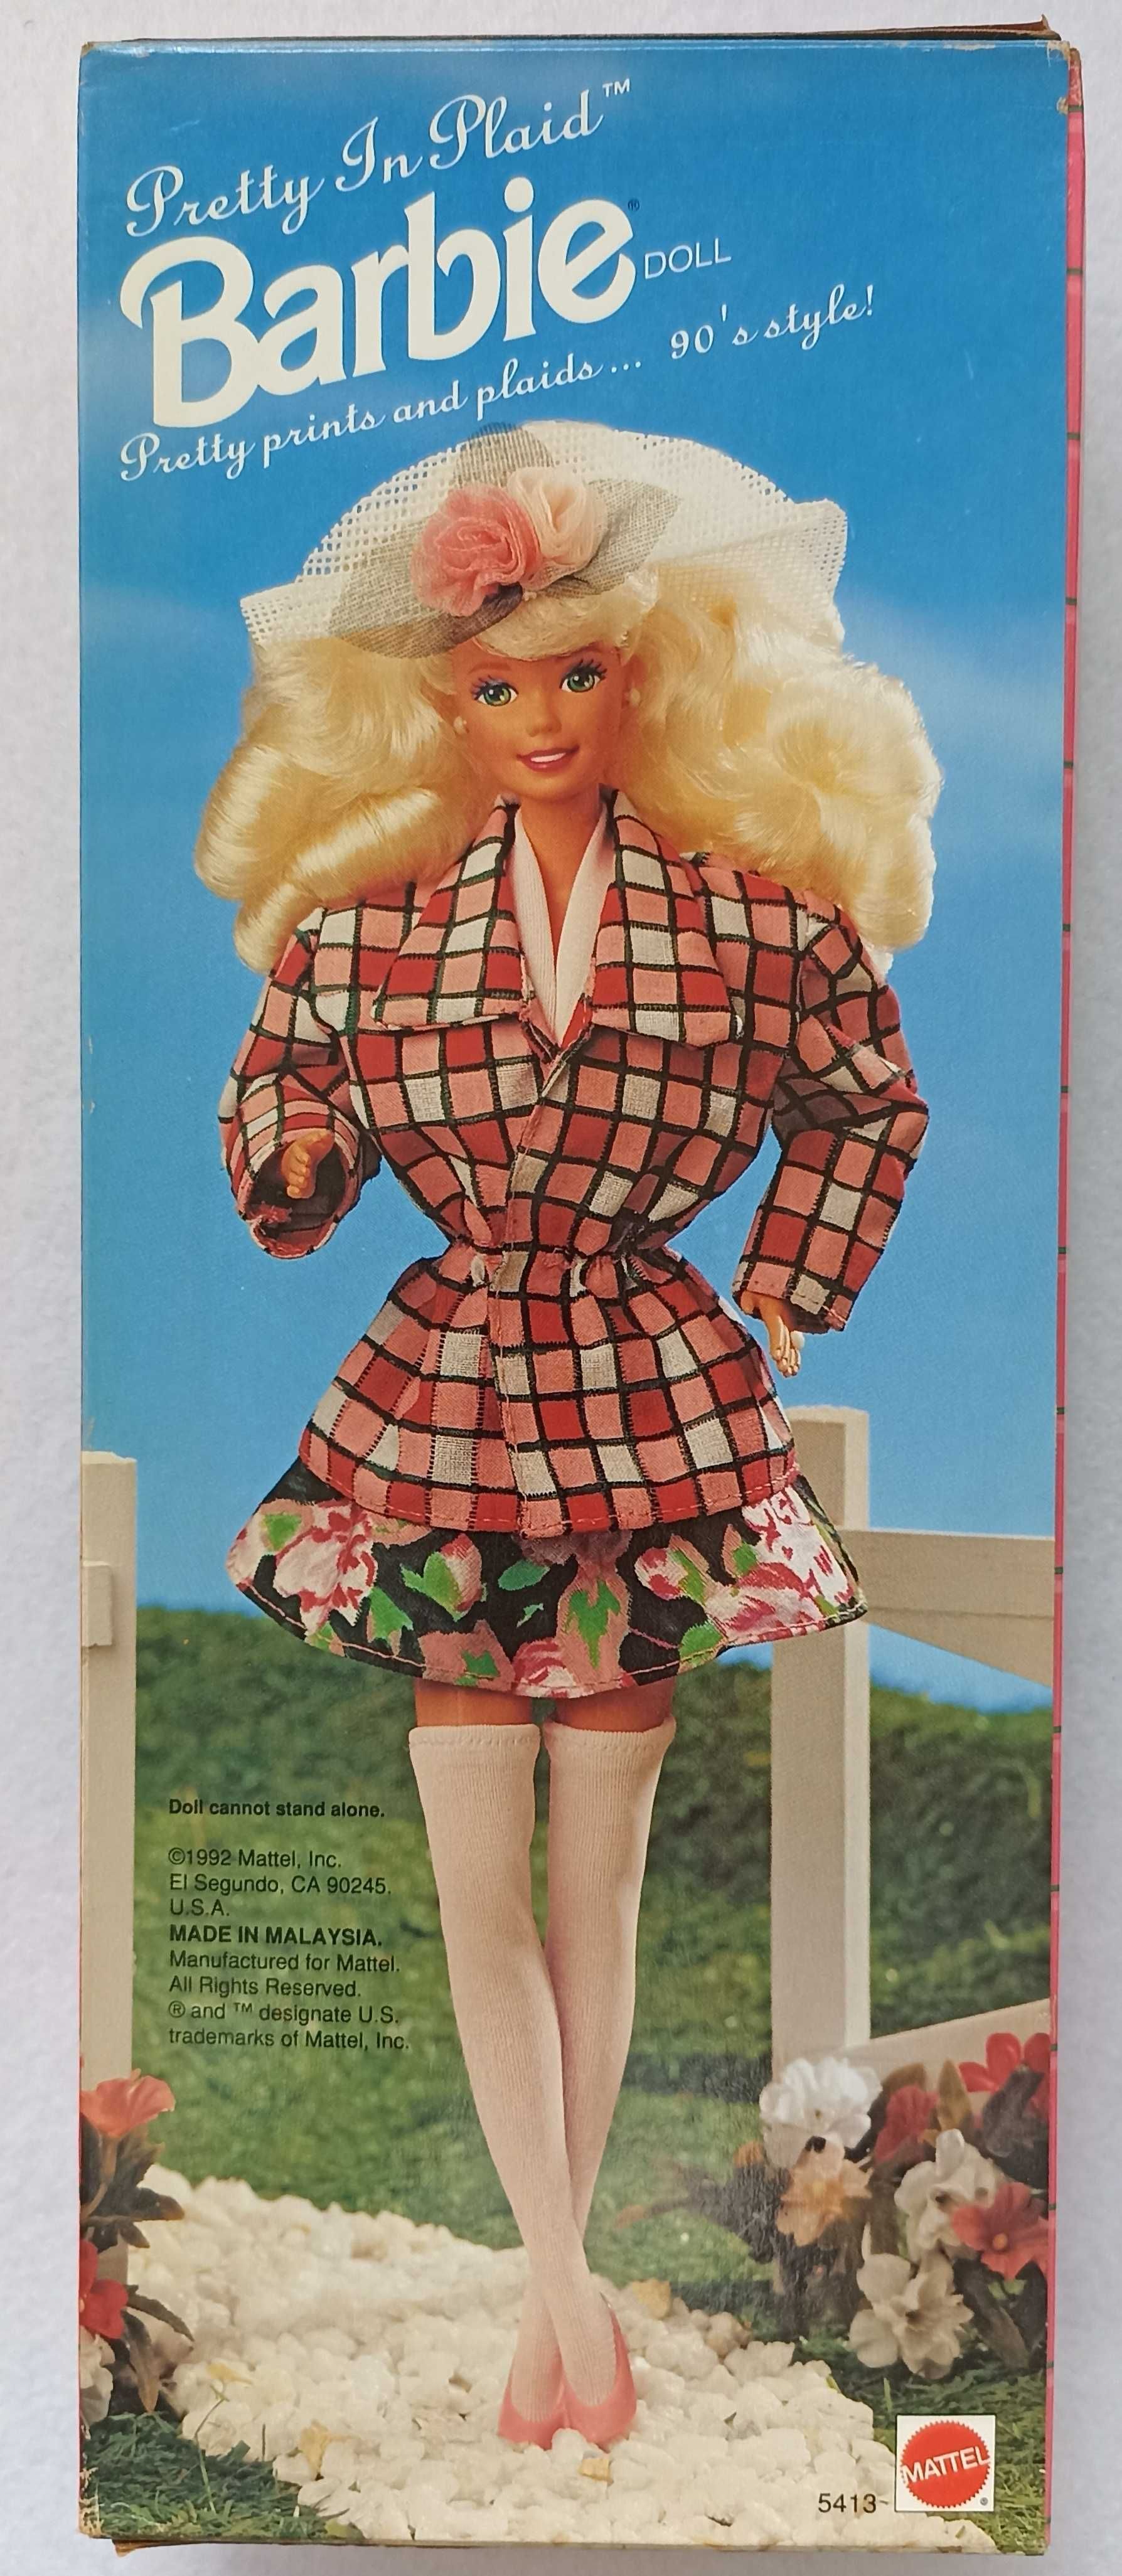 Barbie Pretty in Plaid designed exclusive for Target.